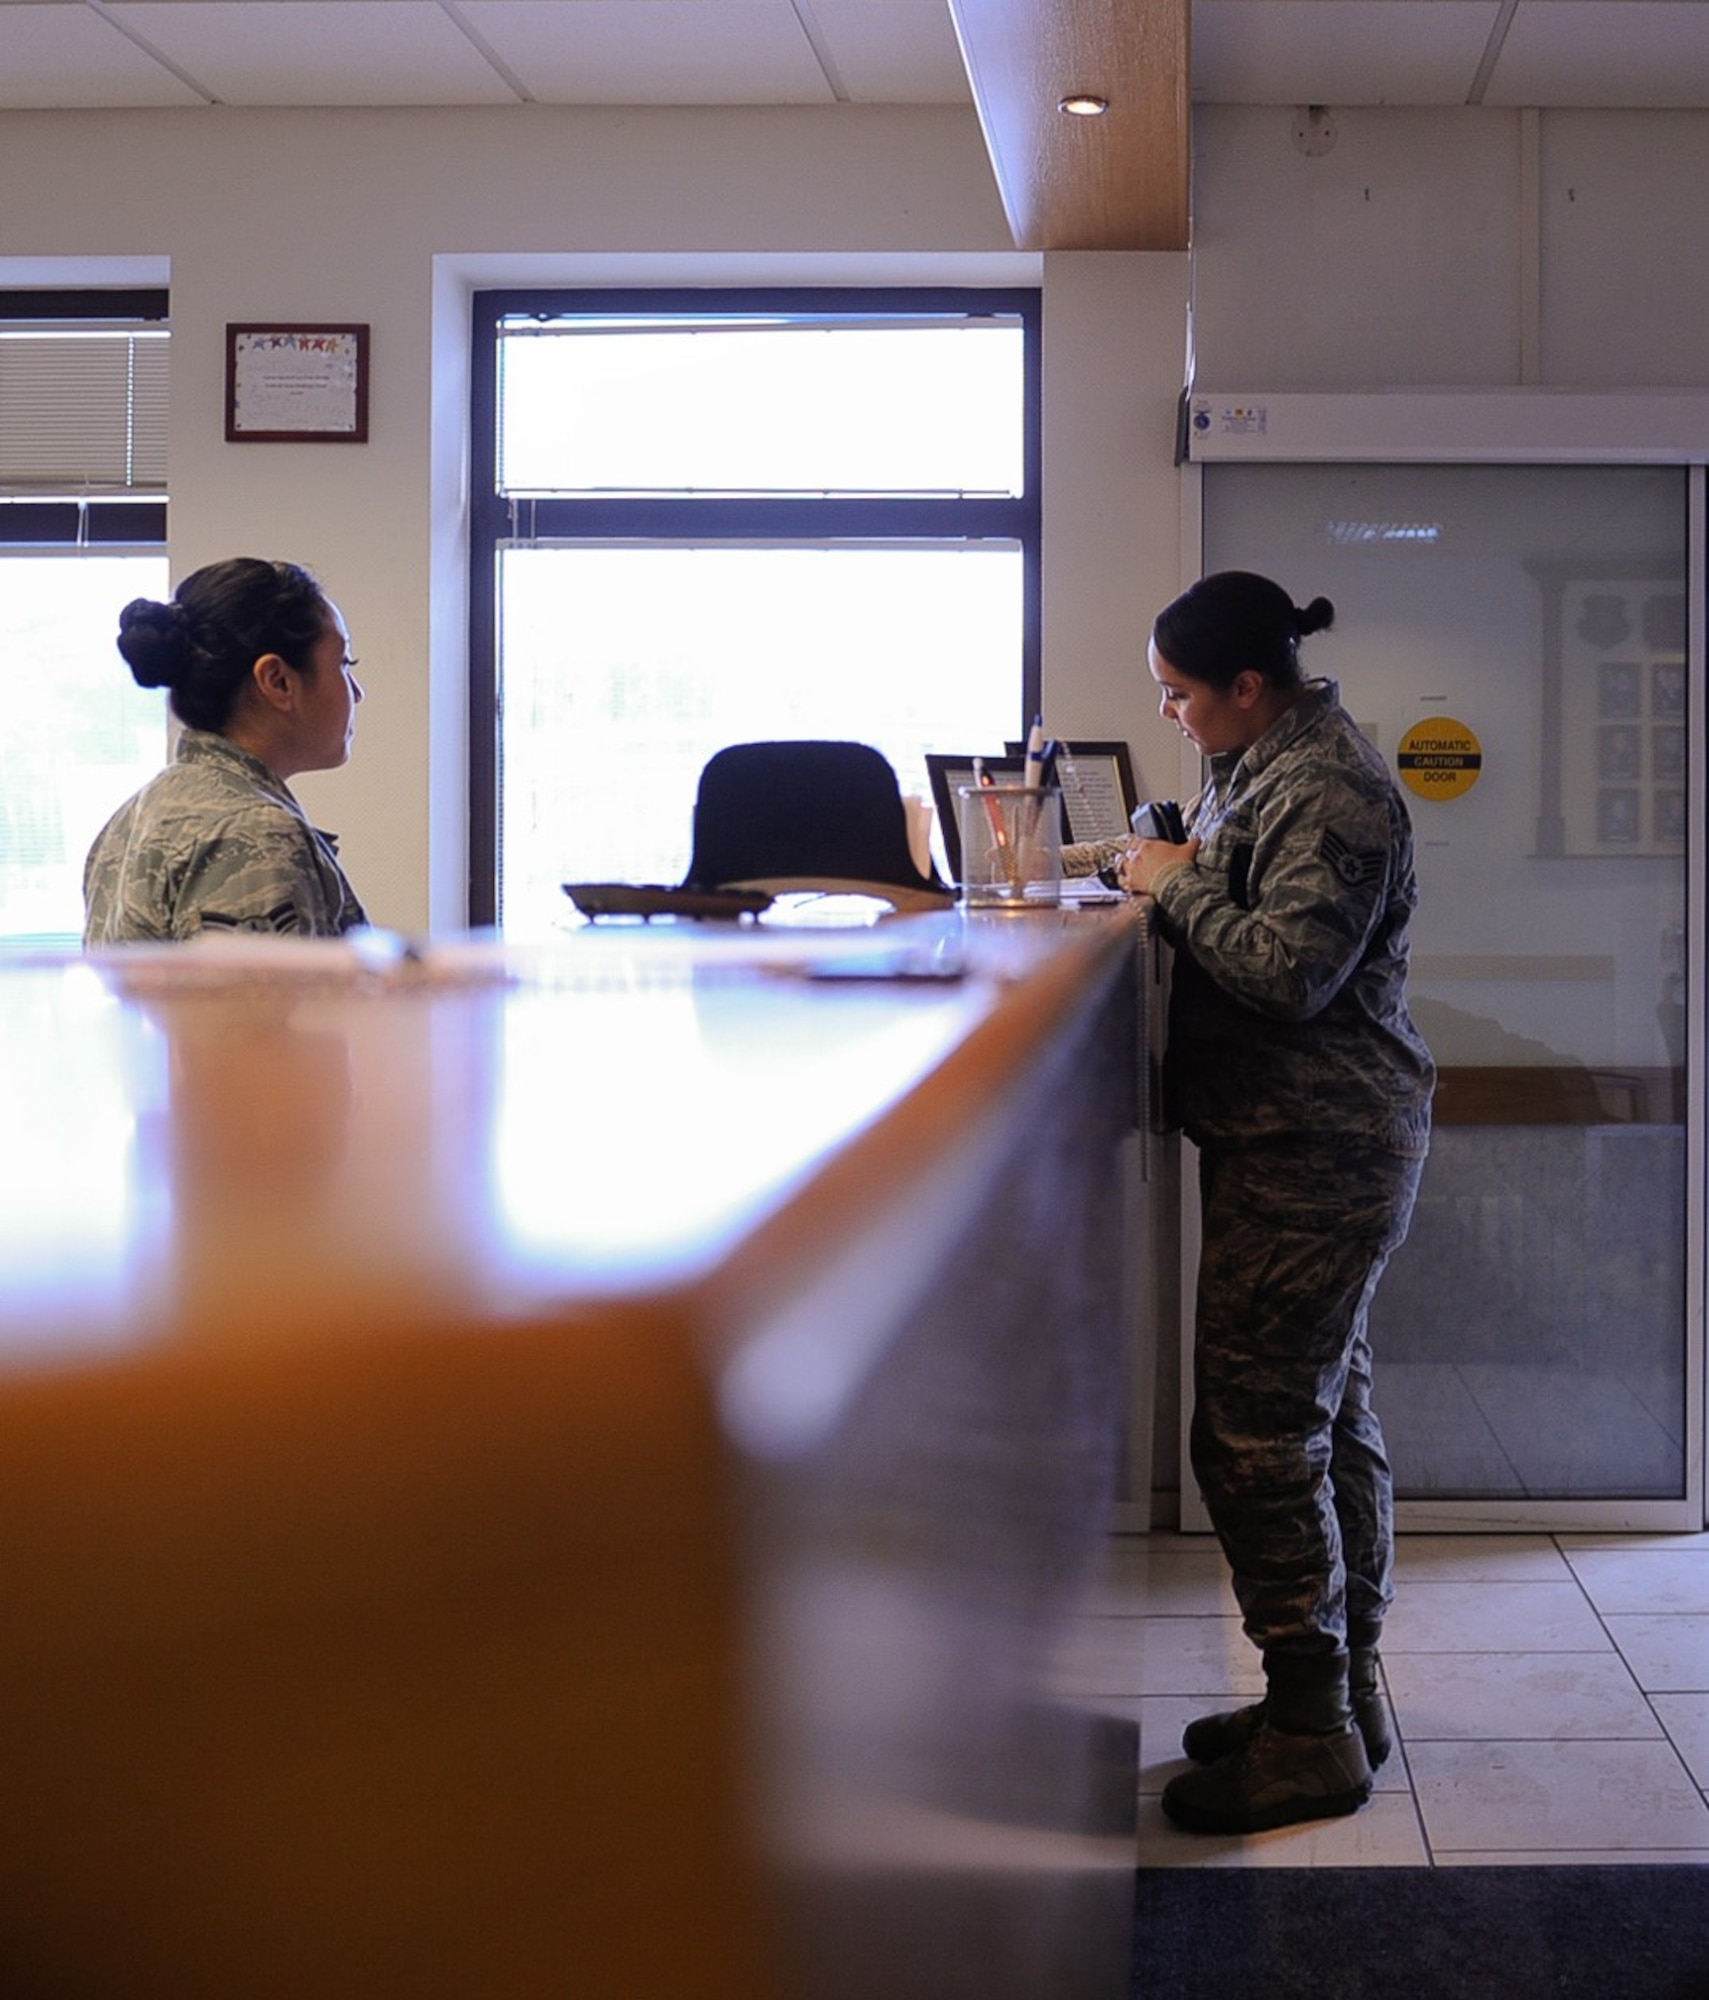 Airman 1st Class Daniela Pastor, 86th Airlift Wing Judge Advocate paralegal, assists Staff Sgt. Tynisia Hains, 86th Force Support Squadron installation patrolman, at the base legal office at Ramstein Air Base, Germany, Jan. 5, 2017. Ramstein’s Tax Center is located at the base legal office, where volunteers and Airmen work to ensure active-duty members are provided with the tax assistance they need. (U.S. Air Force photo by Airman 1st Class Savannah L. Waters)